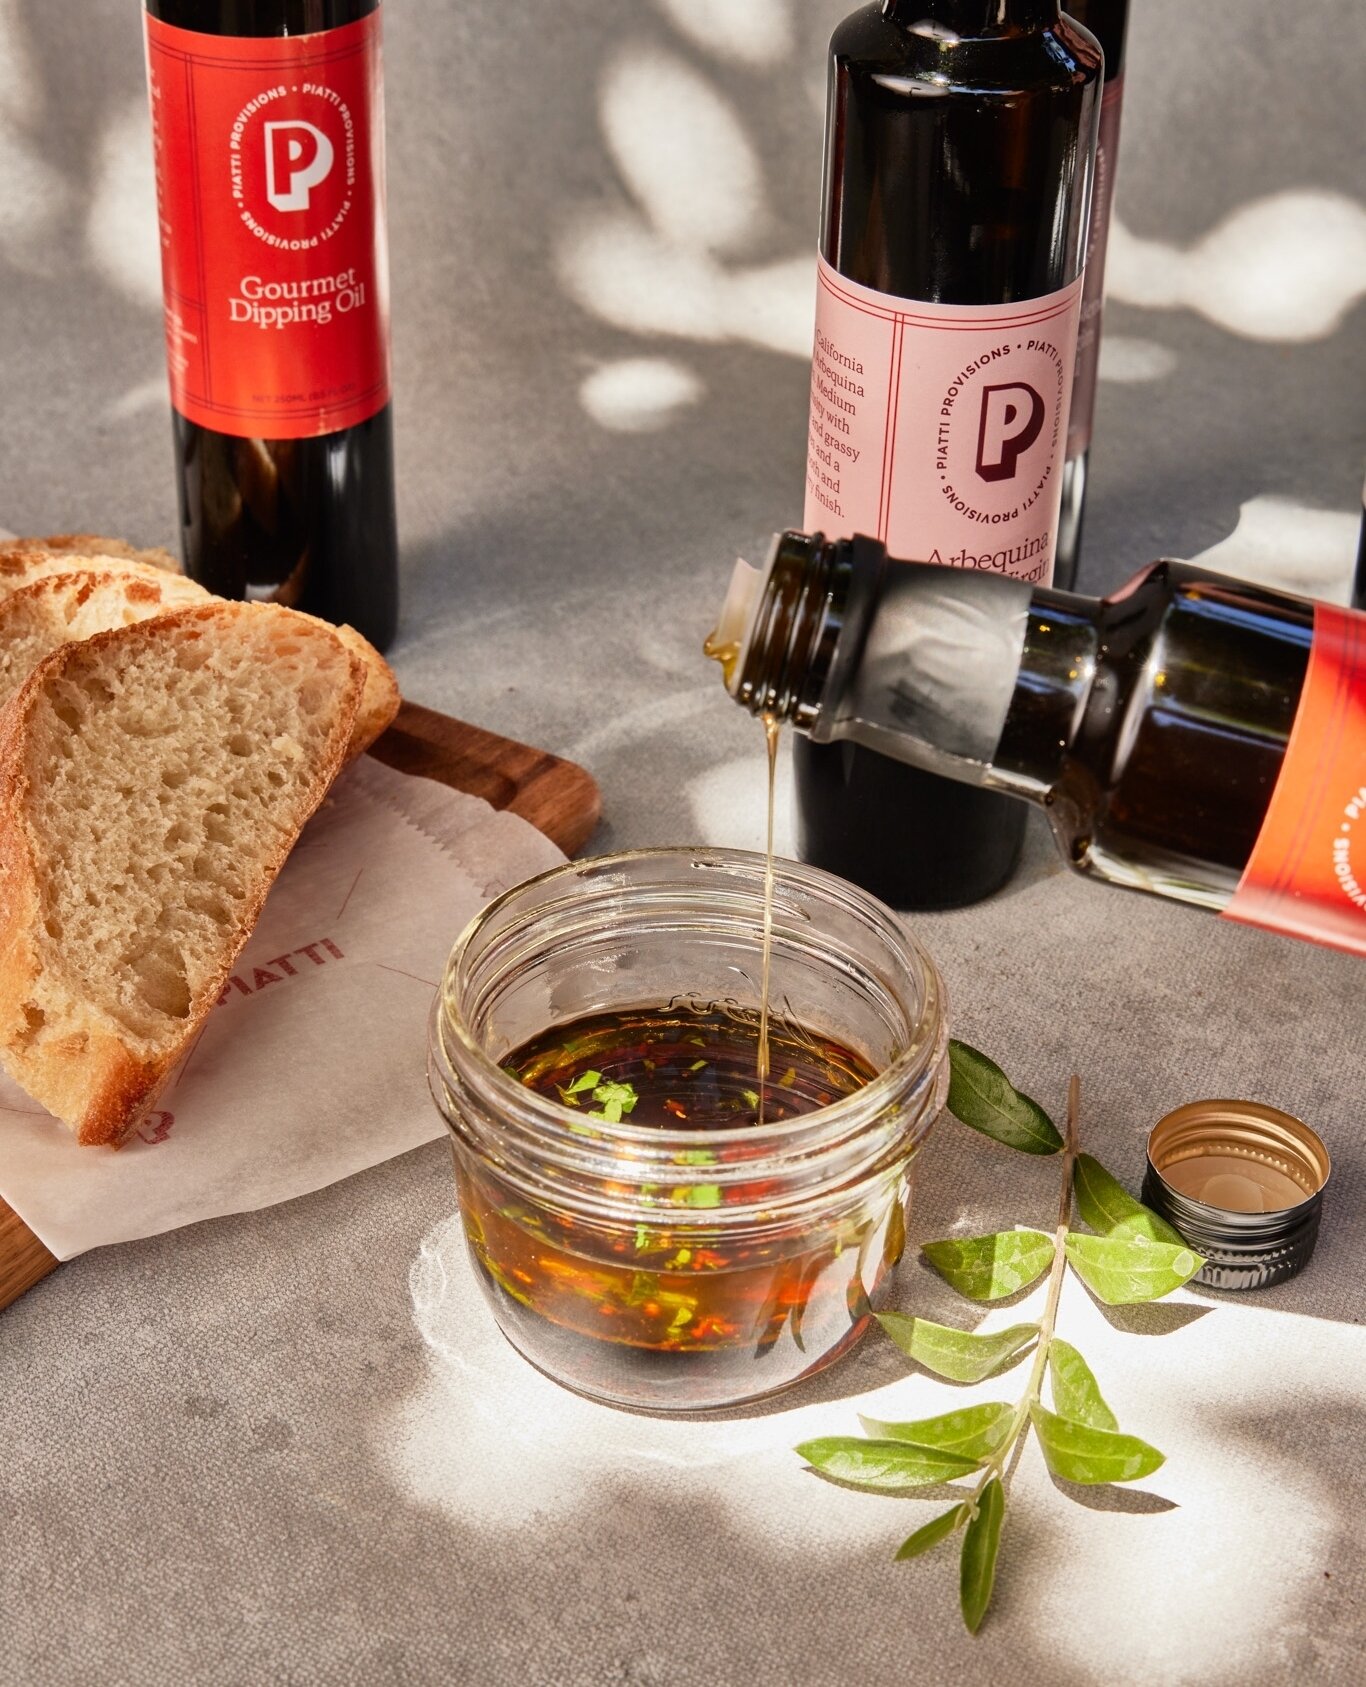 Piatti Provisions and National Picnic Day are a match made in heaven. Stop by to pick up your favorite wine, dipping oils, and more so you can properly celebrate on April 23. ⁠
⁠
⁠
⁠
⁠
#eatpiatti #piatti #italianrestaurant #pasta #italiancuisine #sho